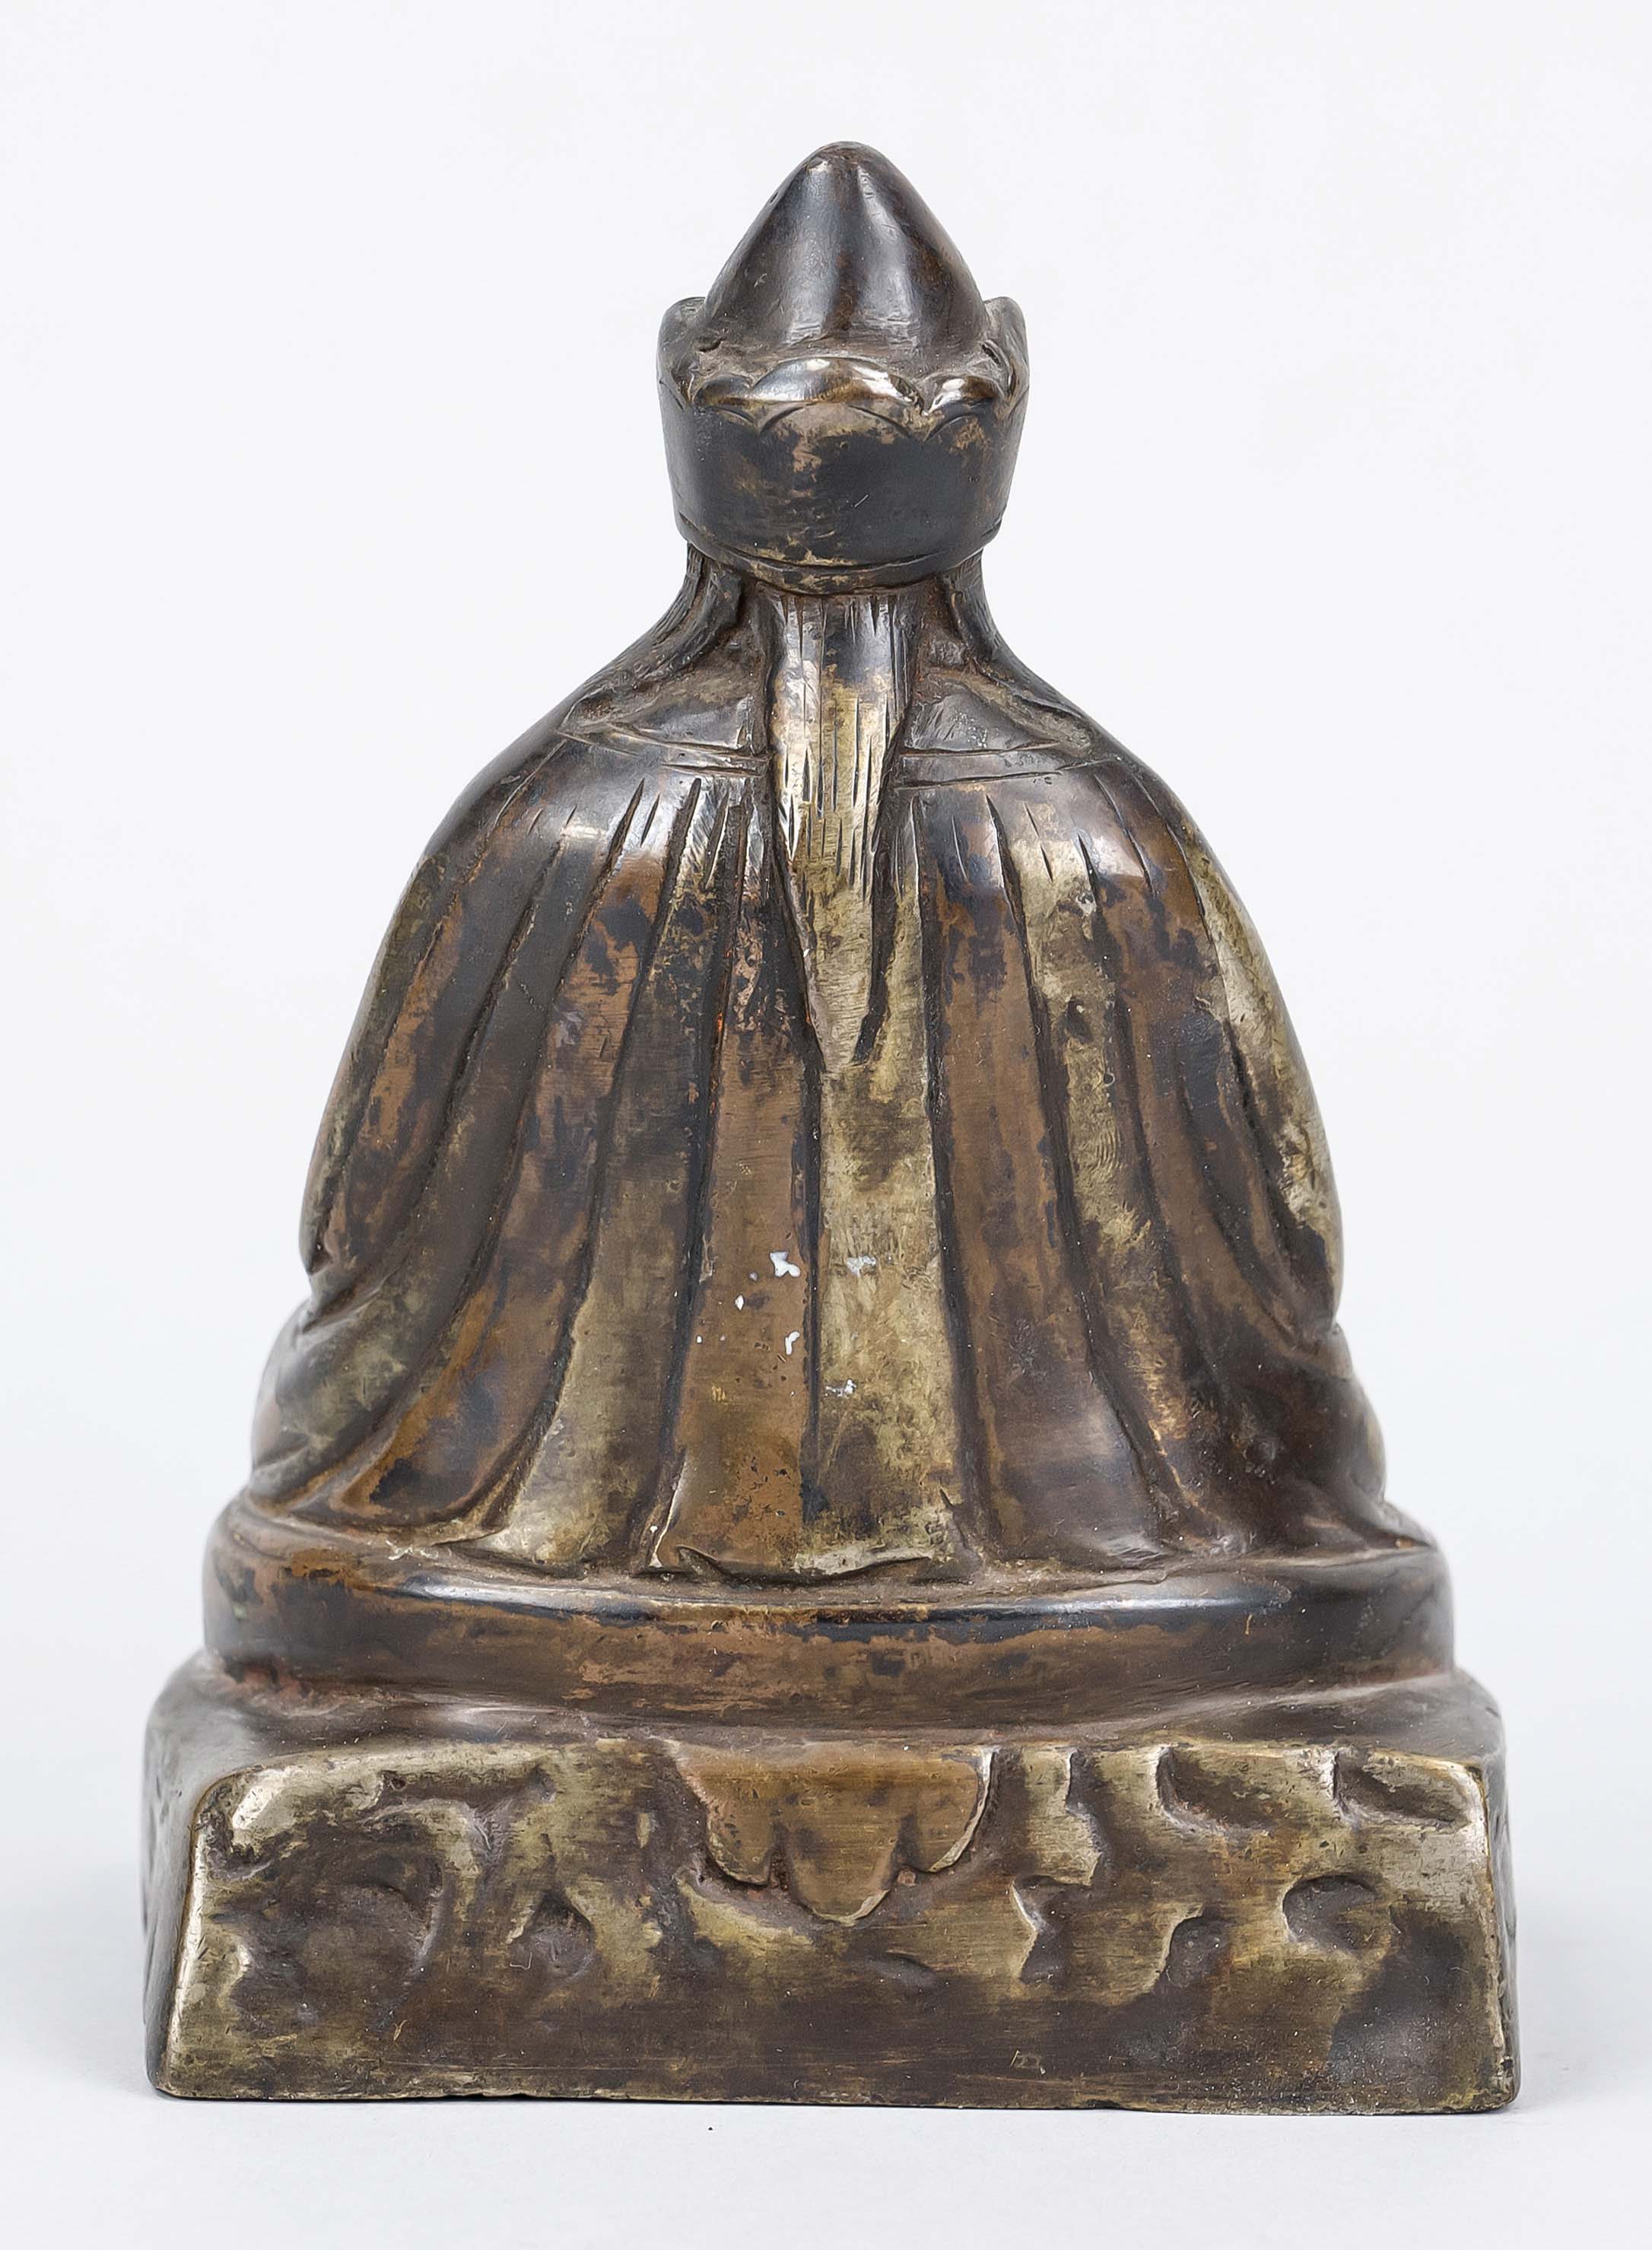 Lama on pedestal with saints, Tibet, probably 19th century, bronze. Without base plate, h. 16 cm - Image 2 of 2